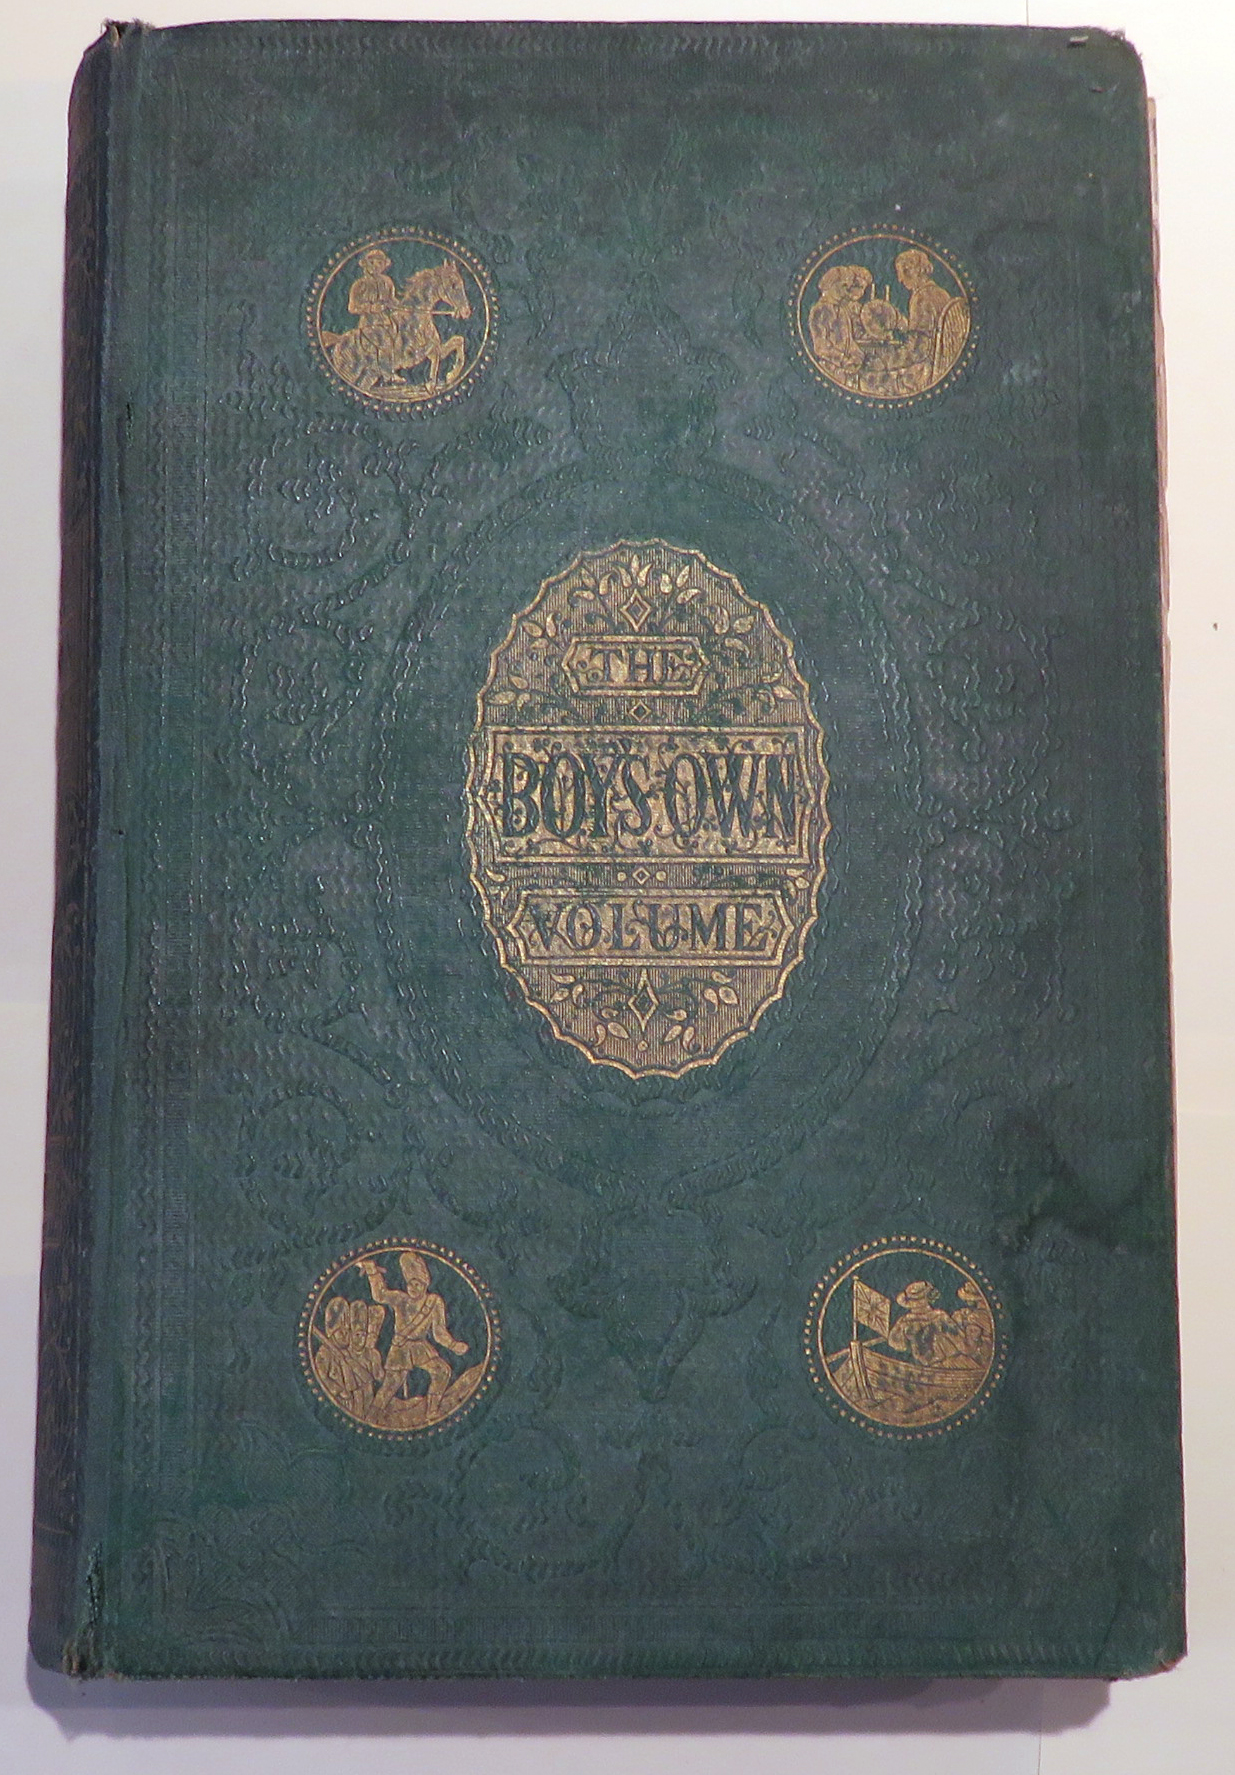 The Boy's Own Volume Of Fact, Fiction, History And Adventure. Christmas 1863